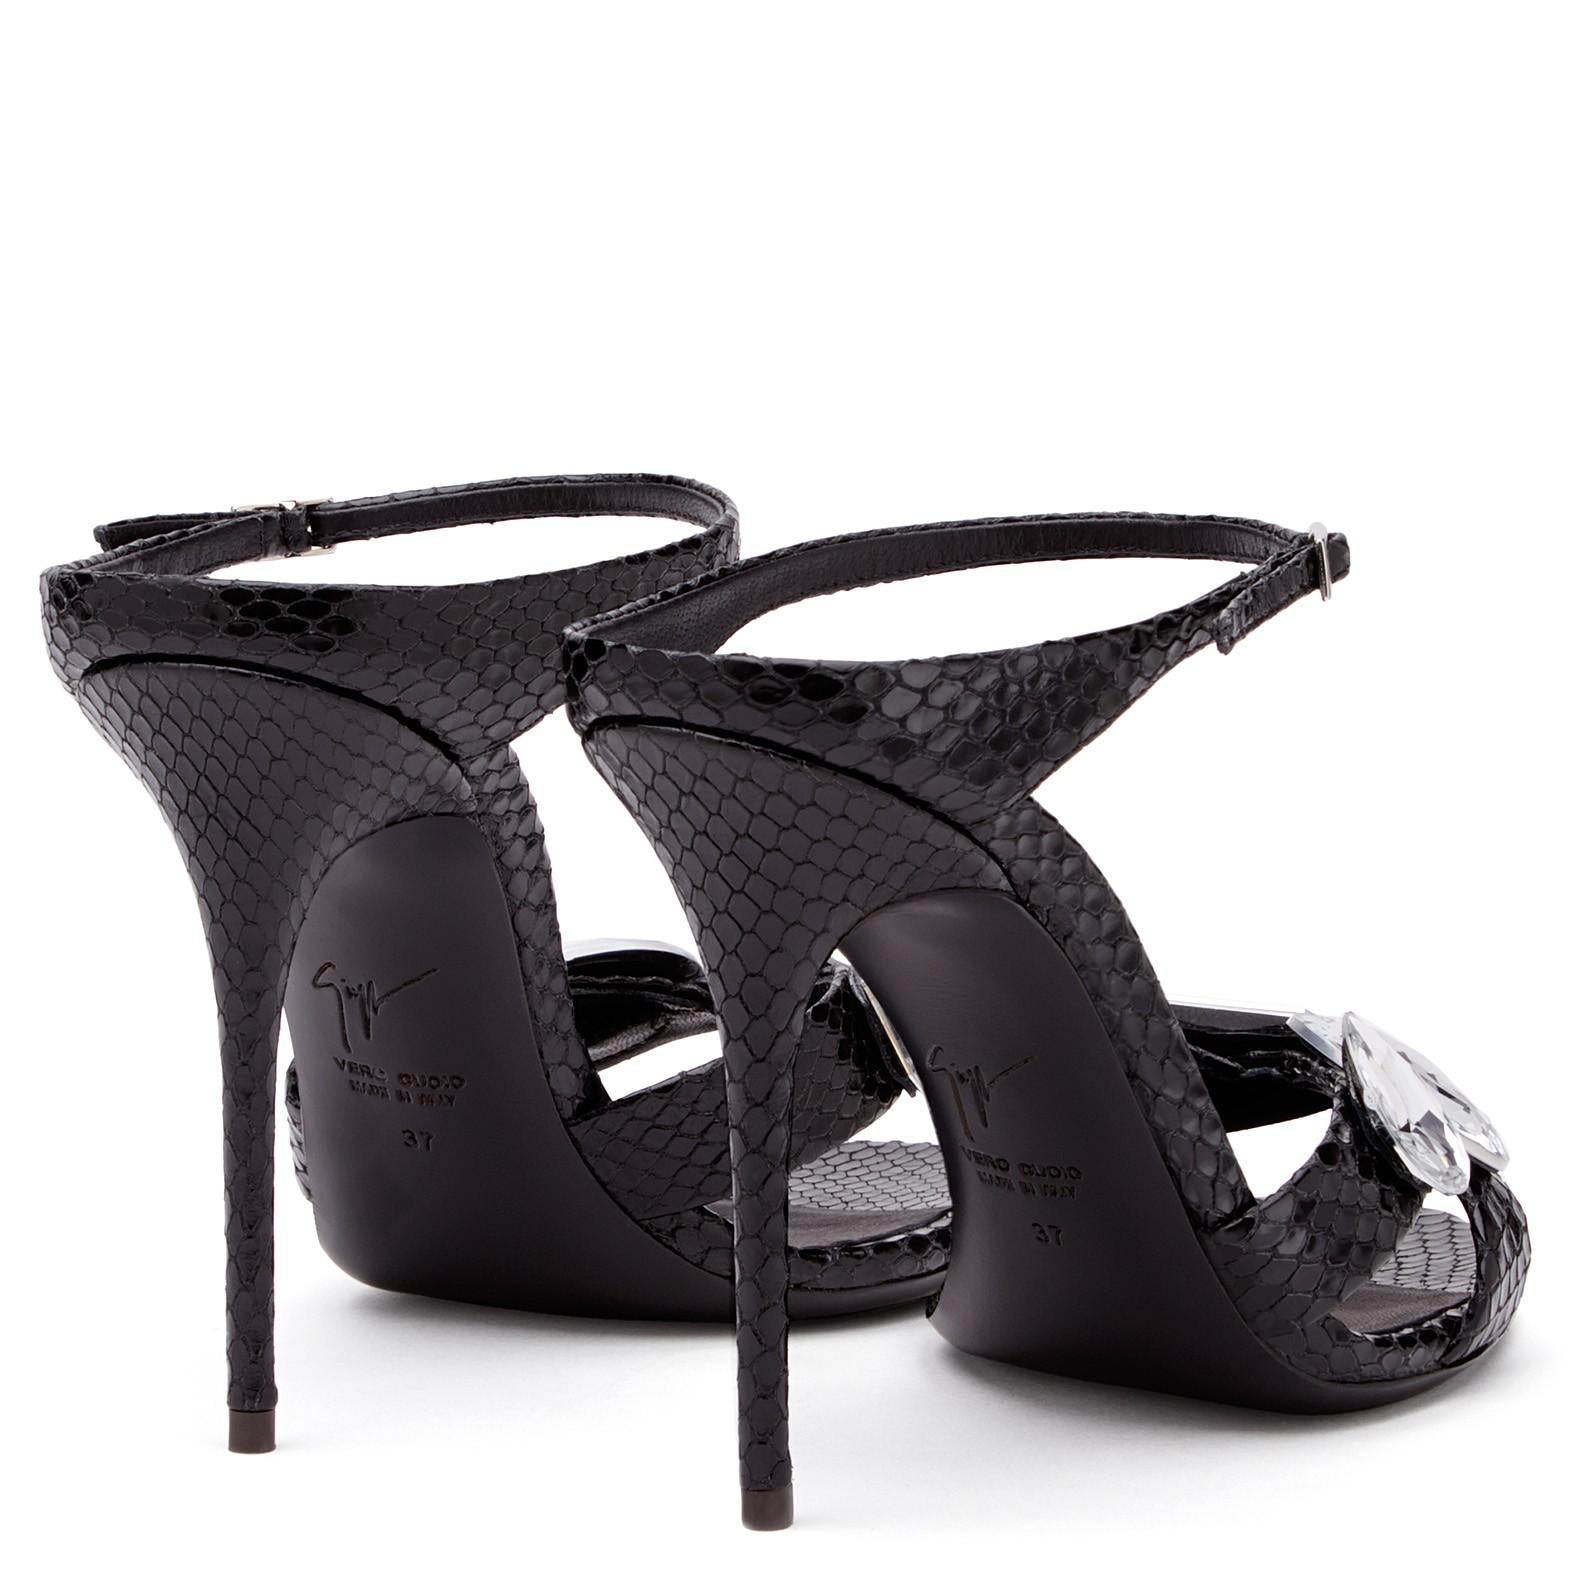 Giuseppe Zanotti NEW Black Leather Crystal Evening Slide In Mules Heels in Box 2